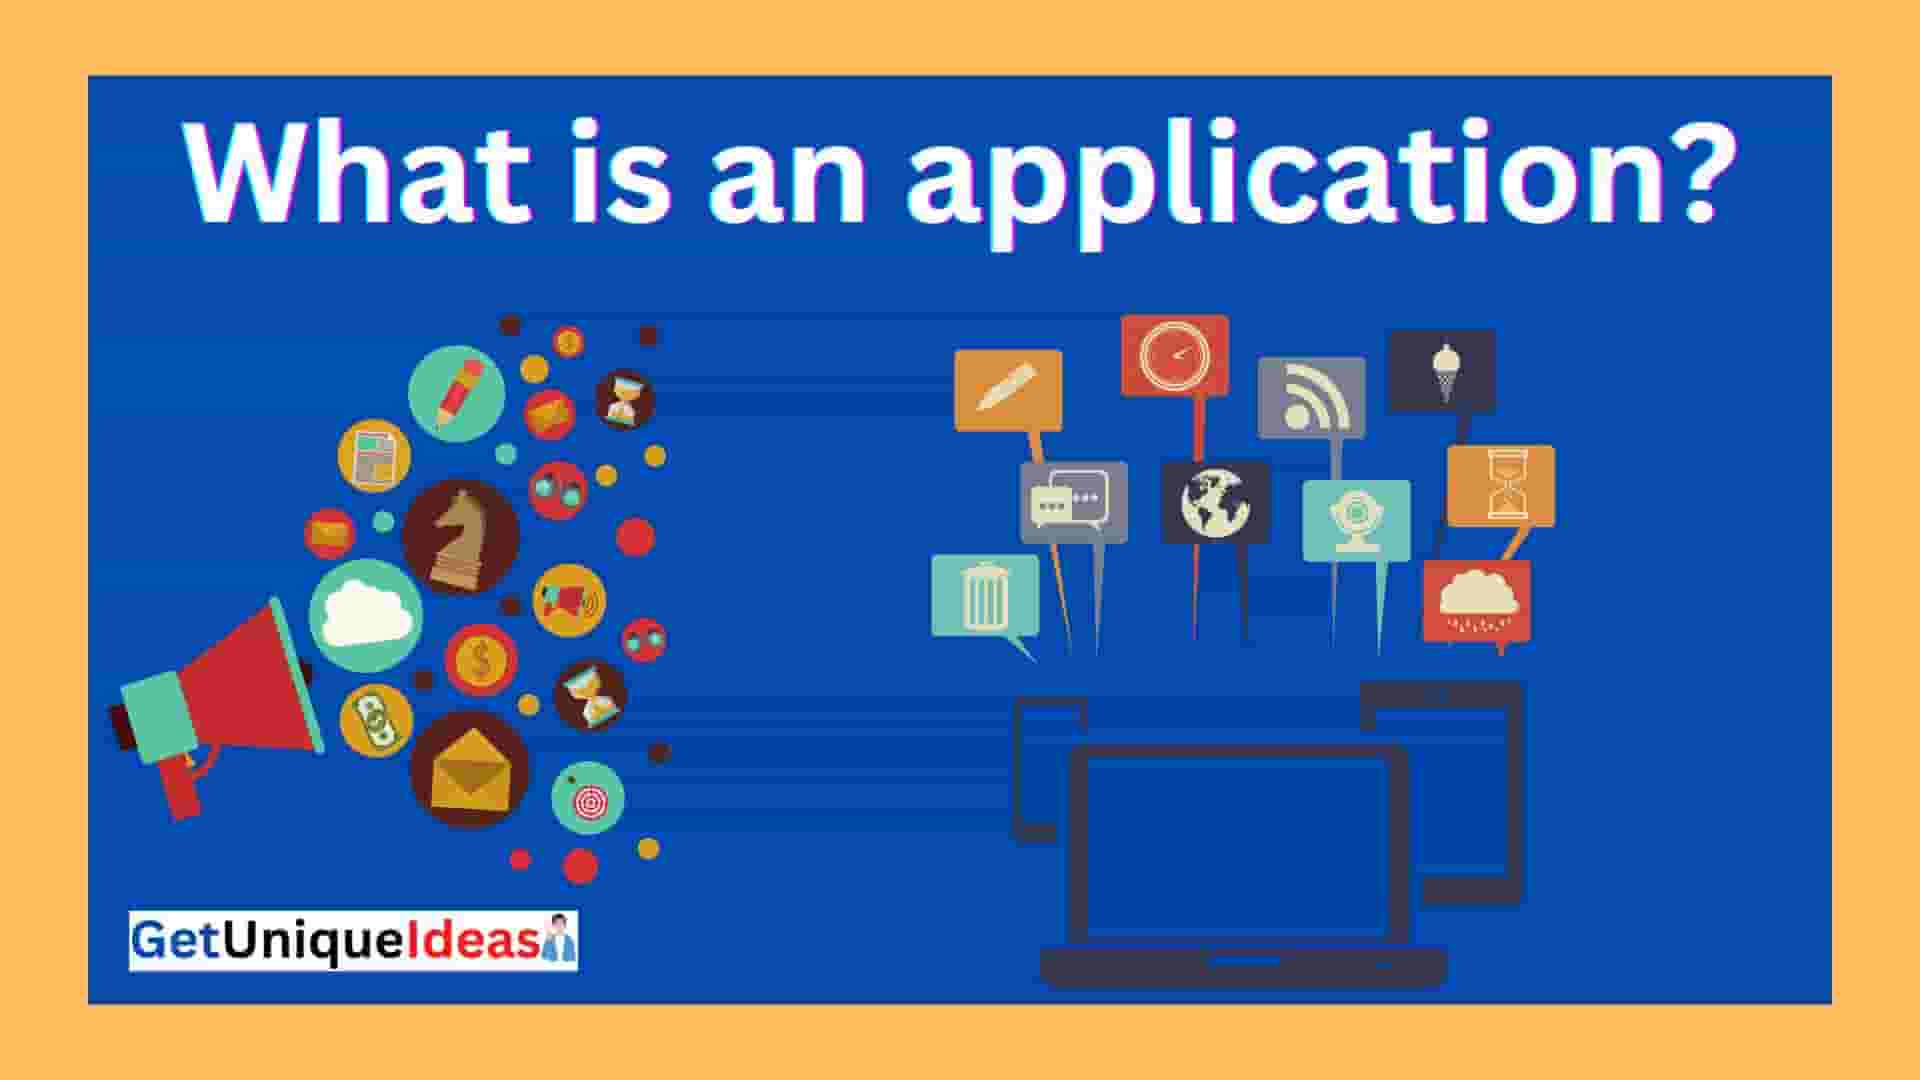 What is an application?